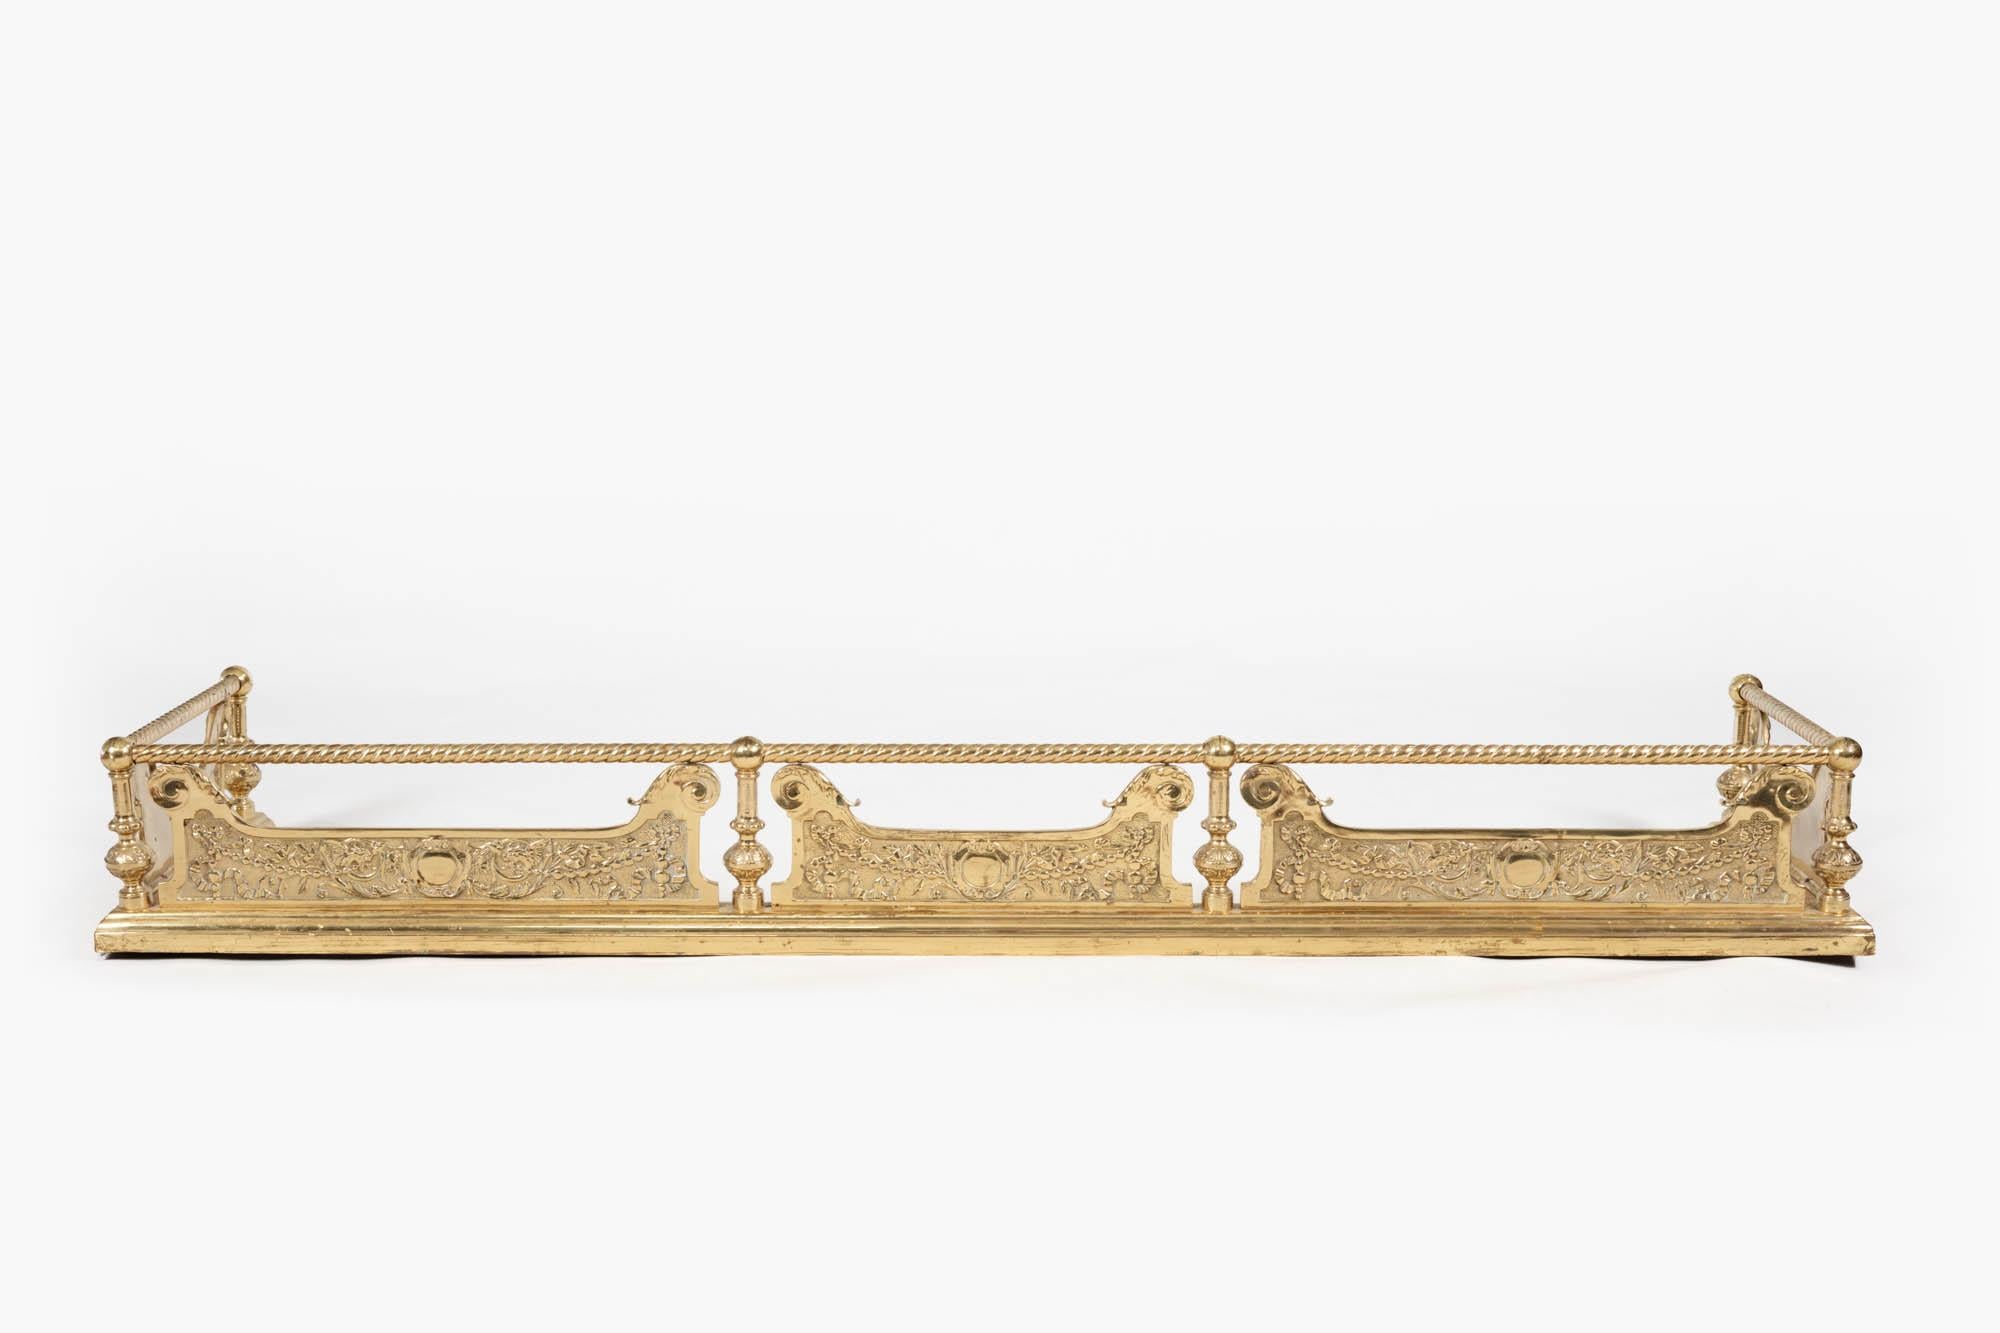 19th Century heavy brass fender in the Neoclassical style with barley twist toprail and cast brass foliate panels with swag and acanthus leaf decoration, divided by simple baulistered columns and post corners.